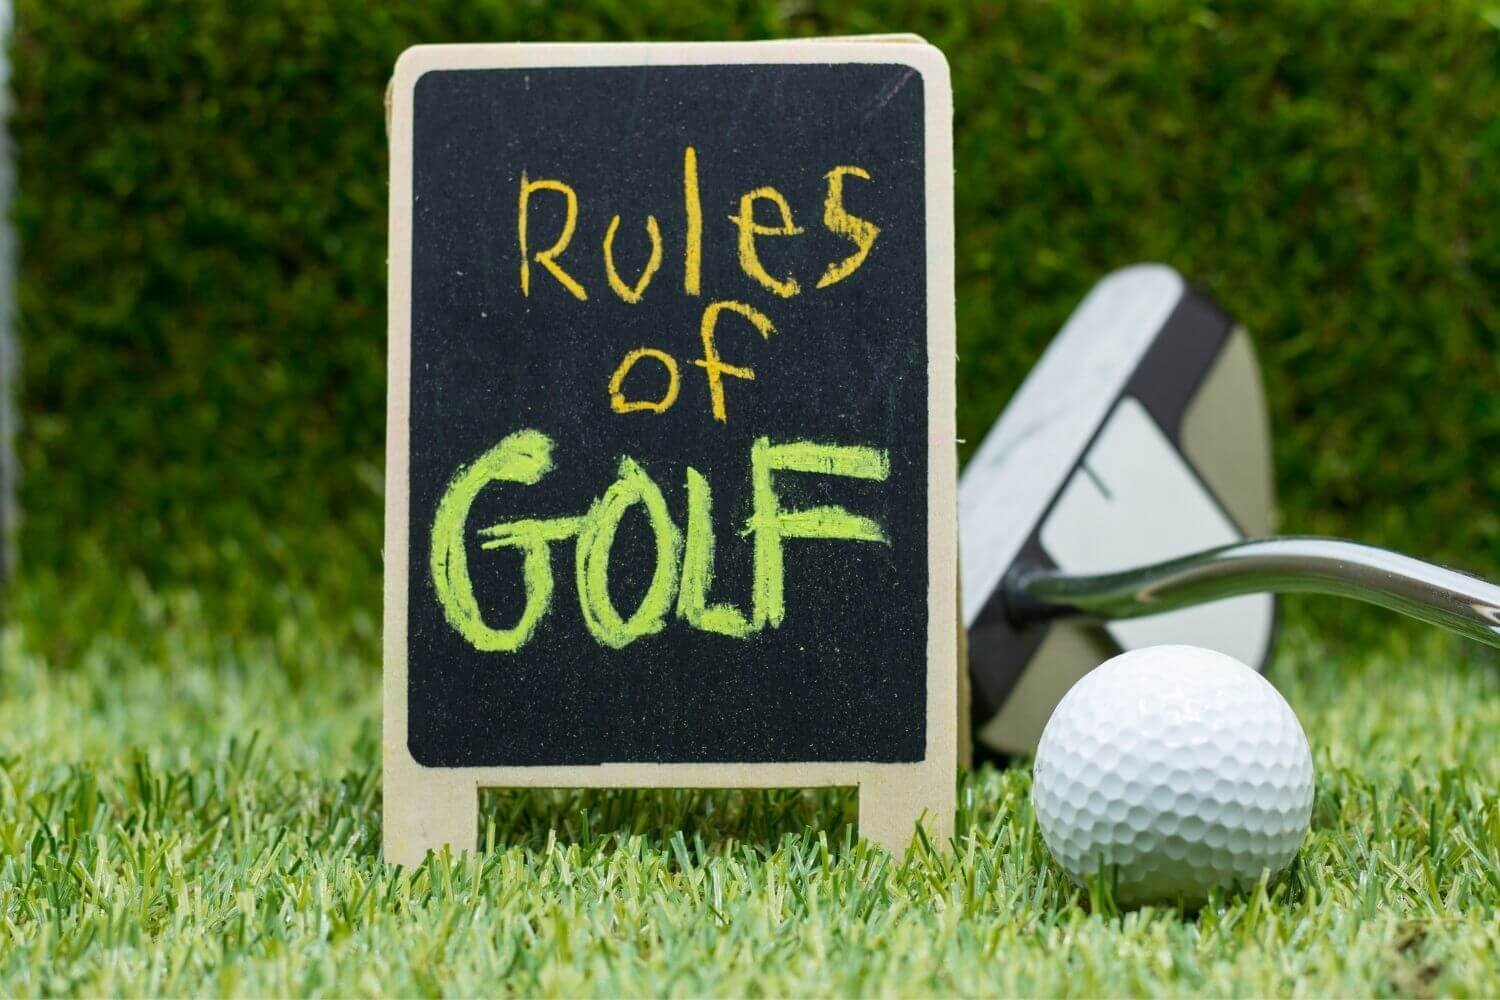 Chalkboard rules of golf sign next to club and ball